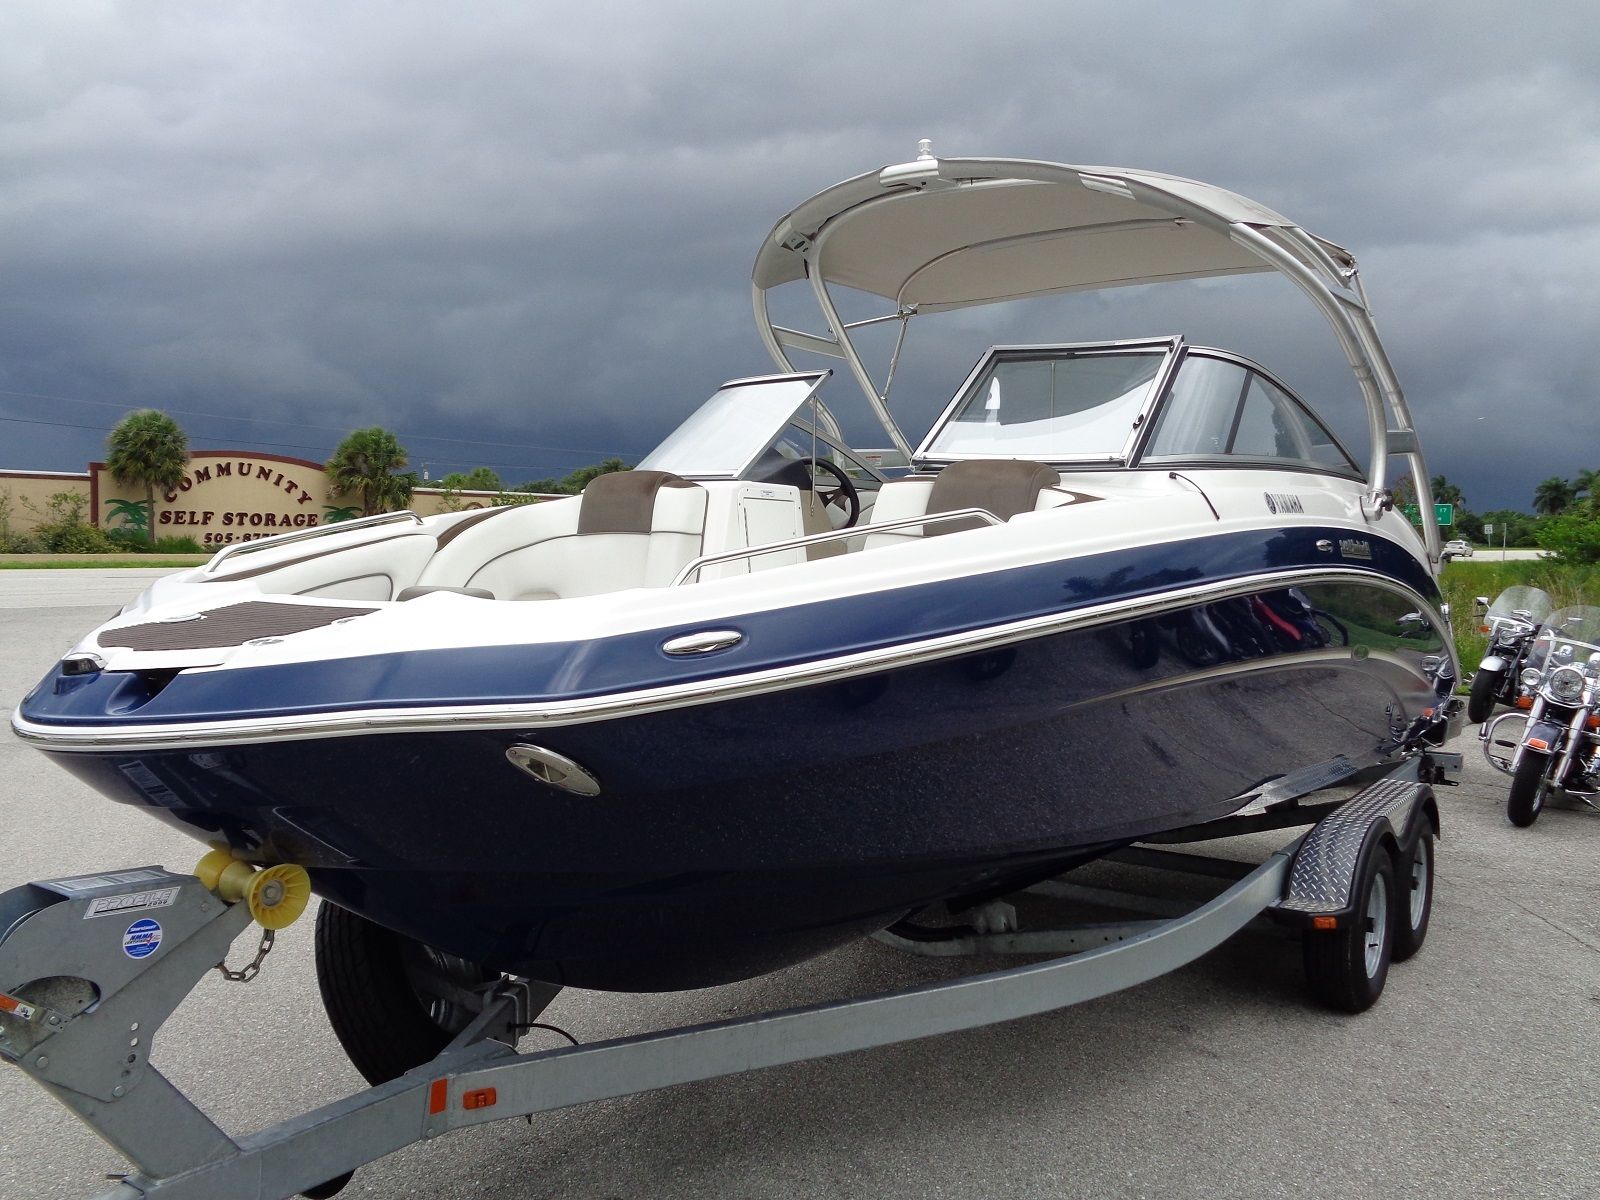 yamaha-242-limited-s-2014-for-sale-for-39-995-boats-from-usa